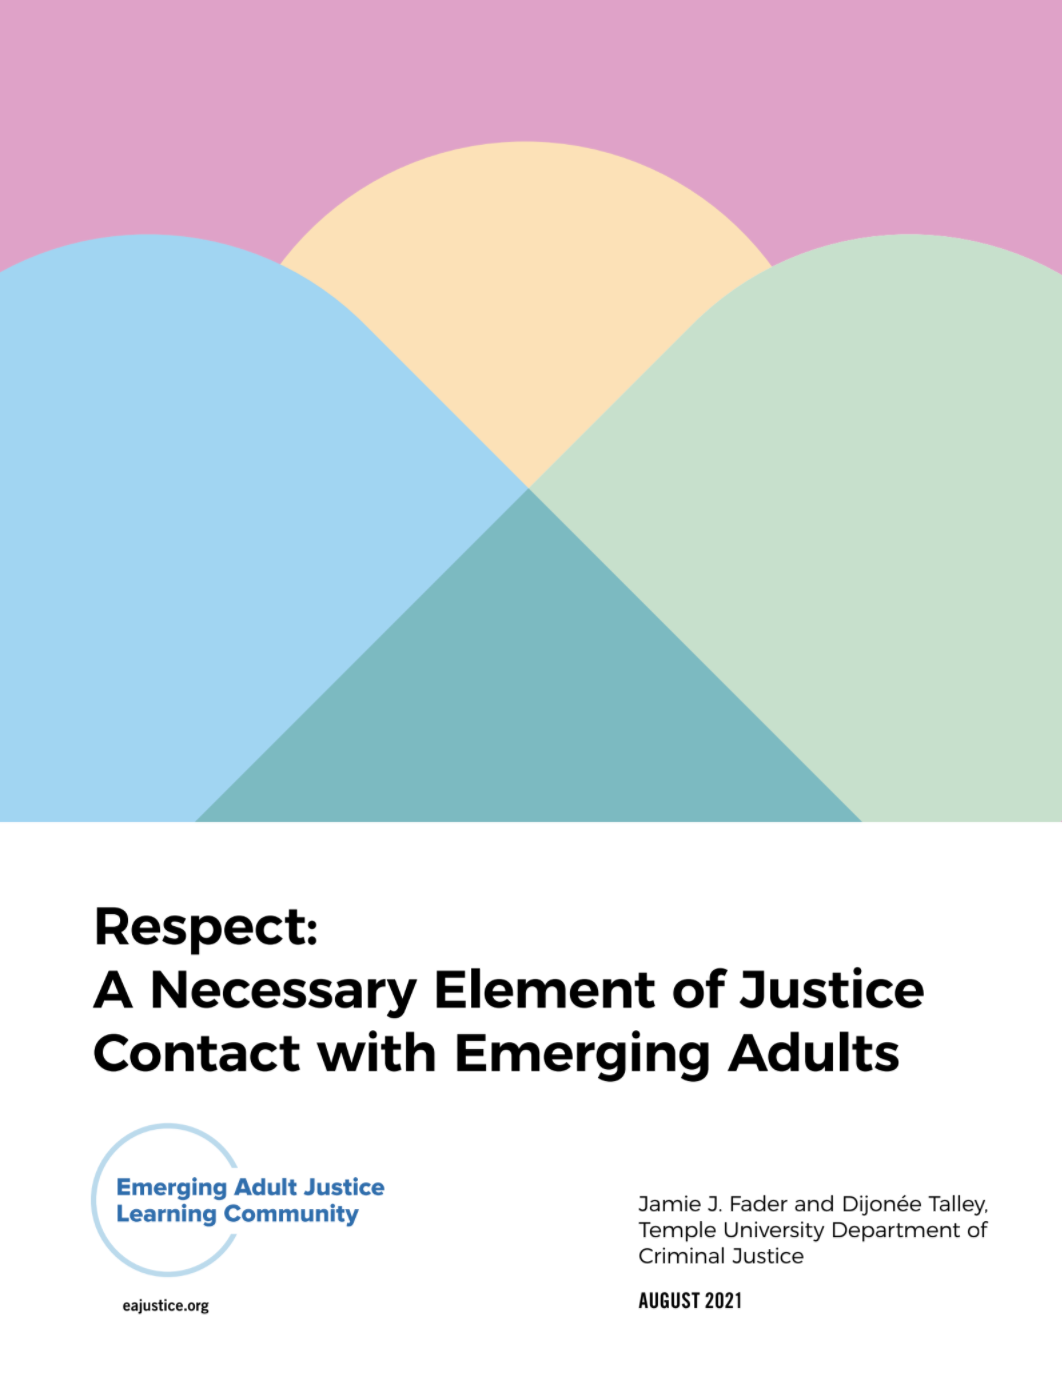 Respect Brief Cover Art: A Necessary Element of Justice Contact with Emerging Adults